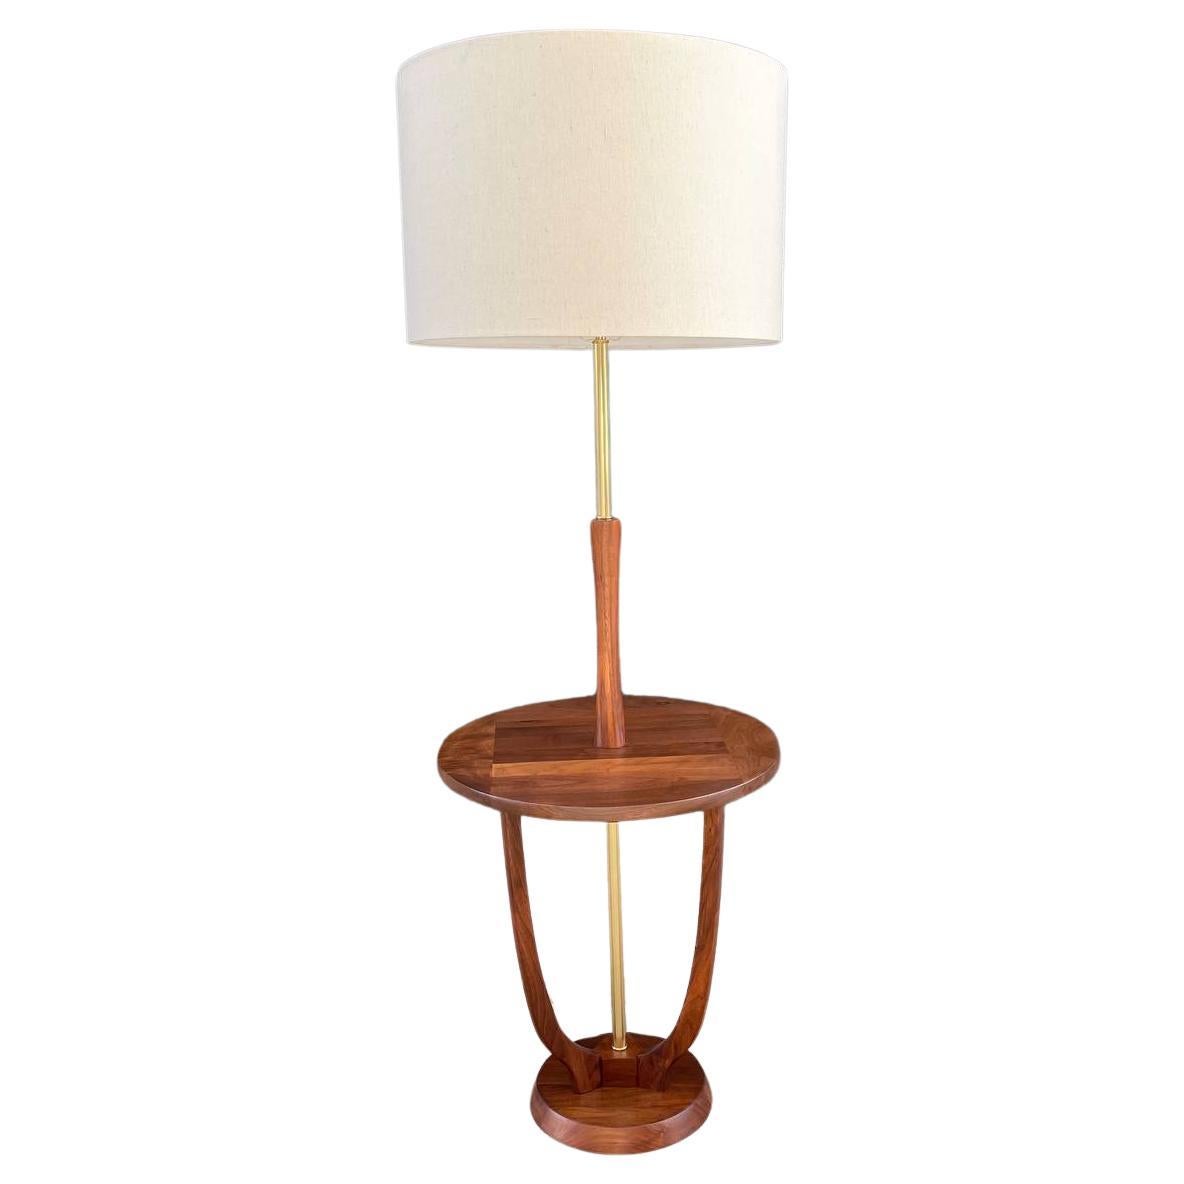 Newly Refinished - Mid-Century Modern Walnut & Brass Floor Lamp with Side Table